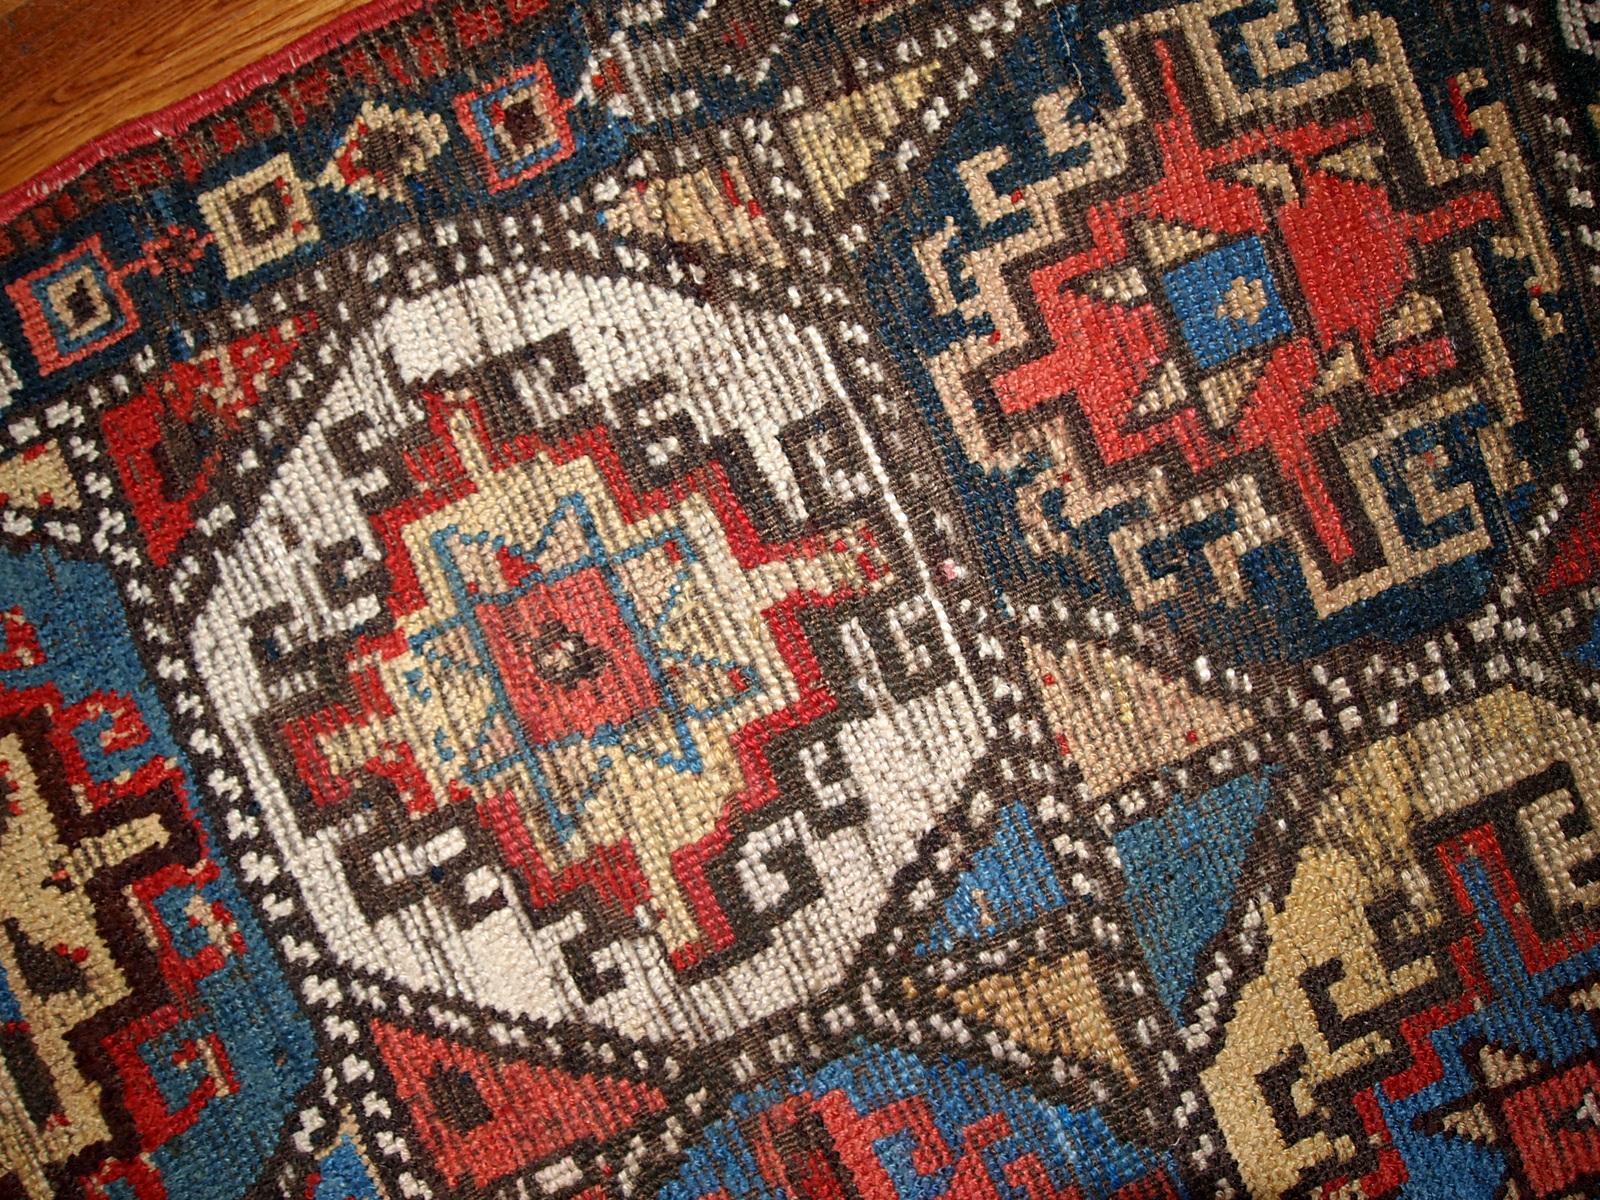 Antique collectible Kurdish rug in colorful shades and tribal ornaments. The rug is in a good shape for it's age, has some age wear. Measures: 3.5' x 4.6' (106cm x 140cm).